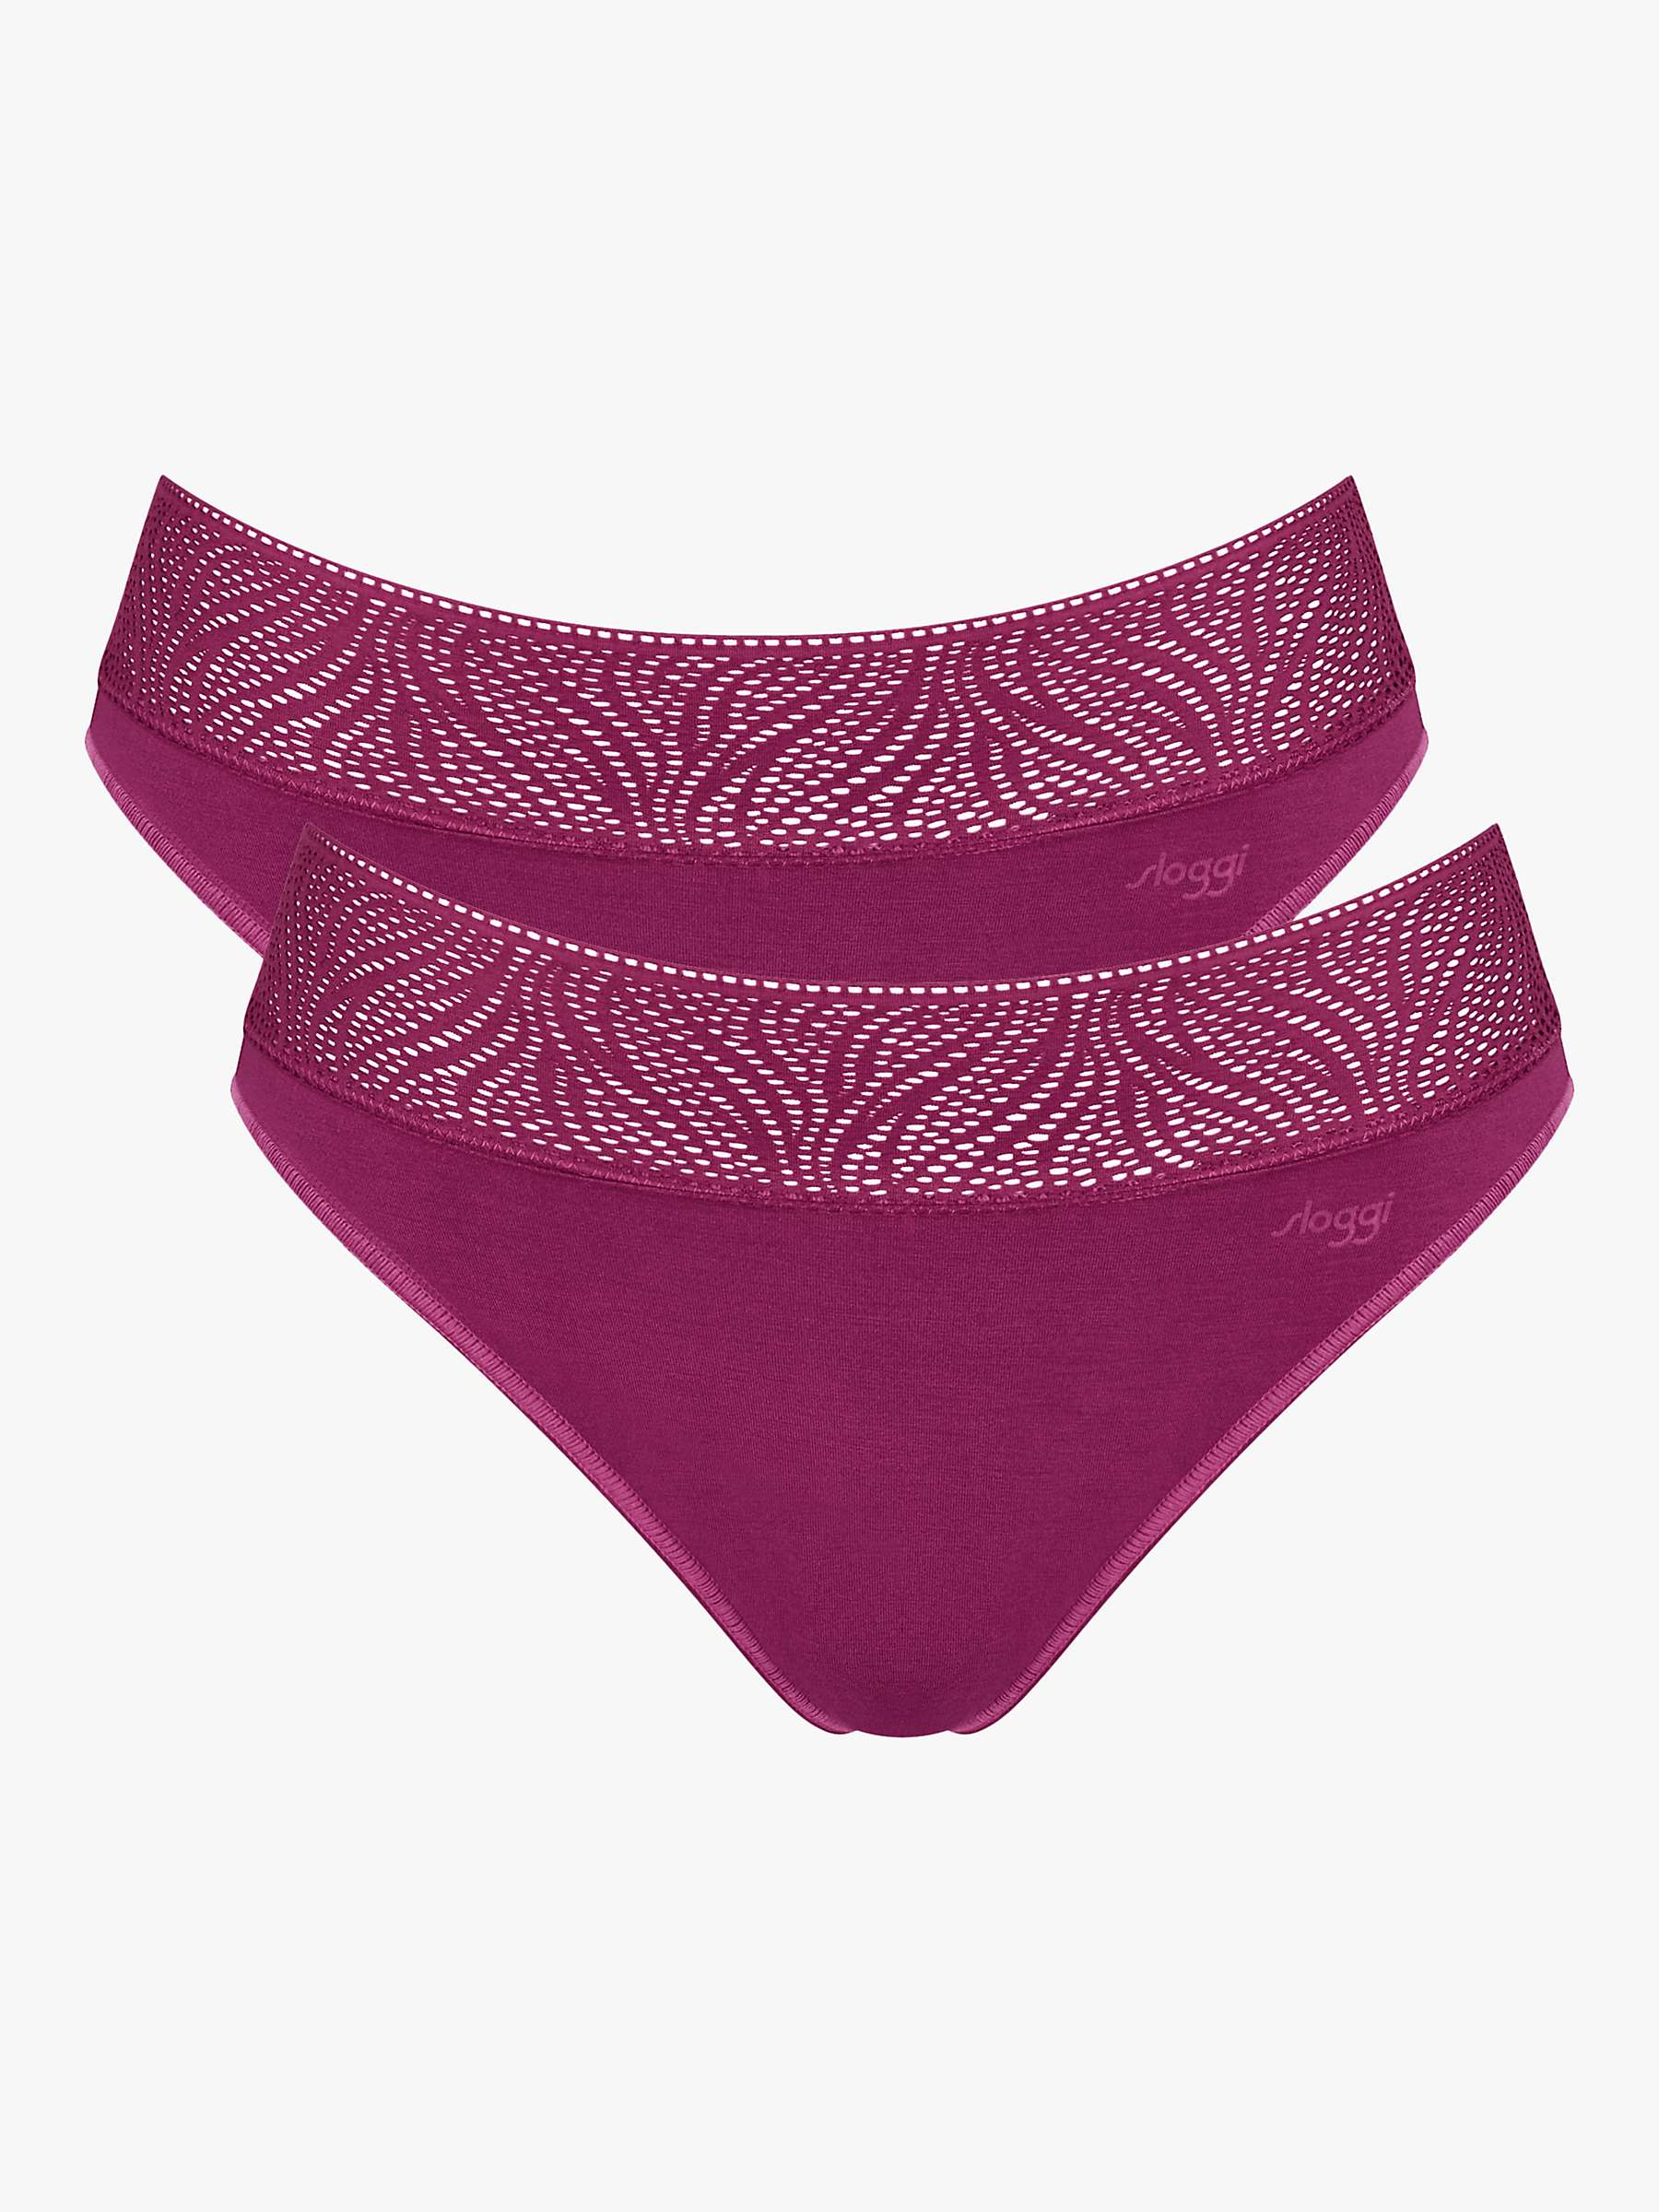 Buy sloggi Light Absorbency Tai Period Knickers, Pack of 2 Online at johnlewis.com